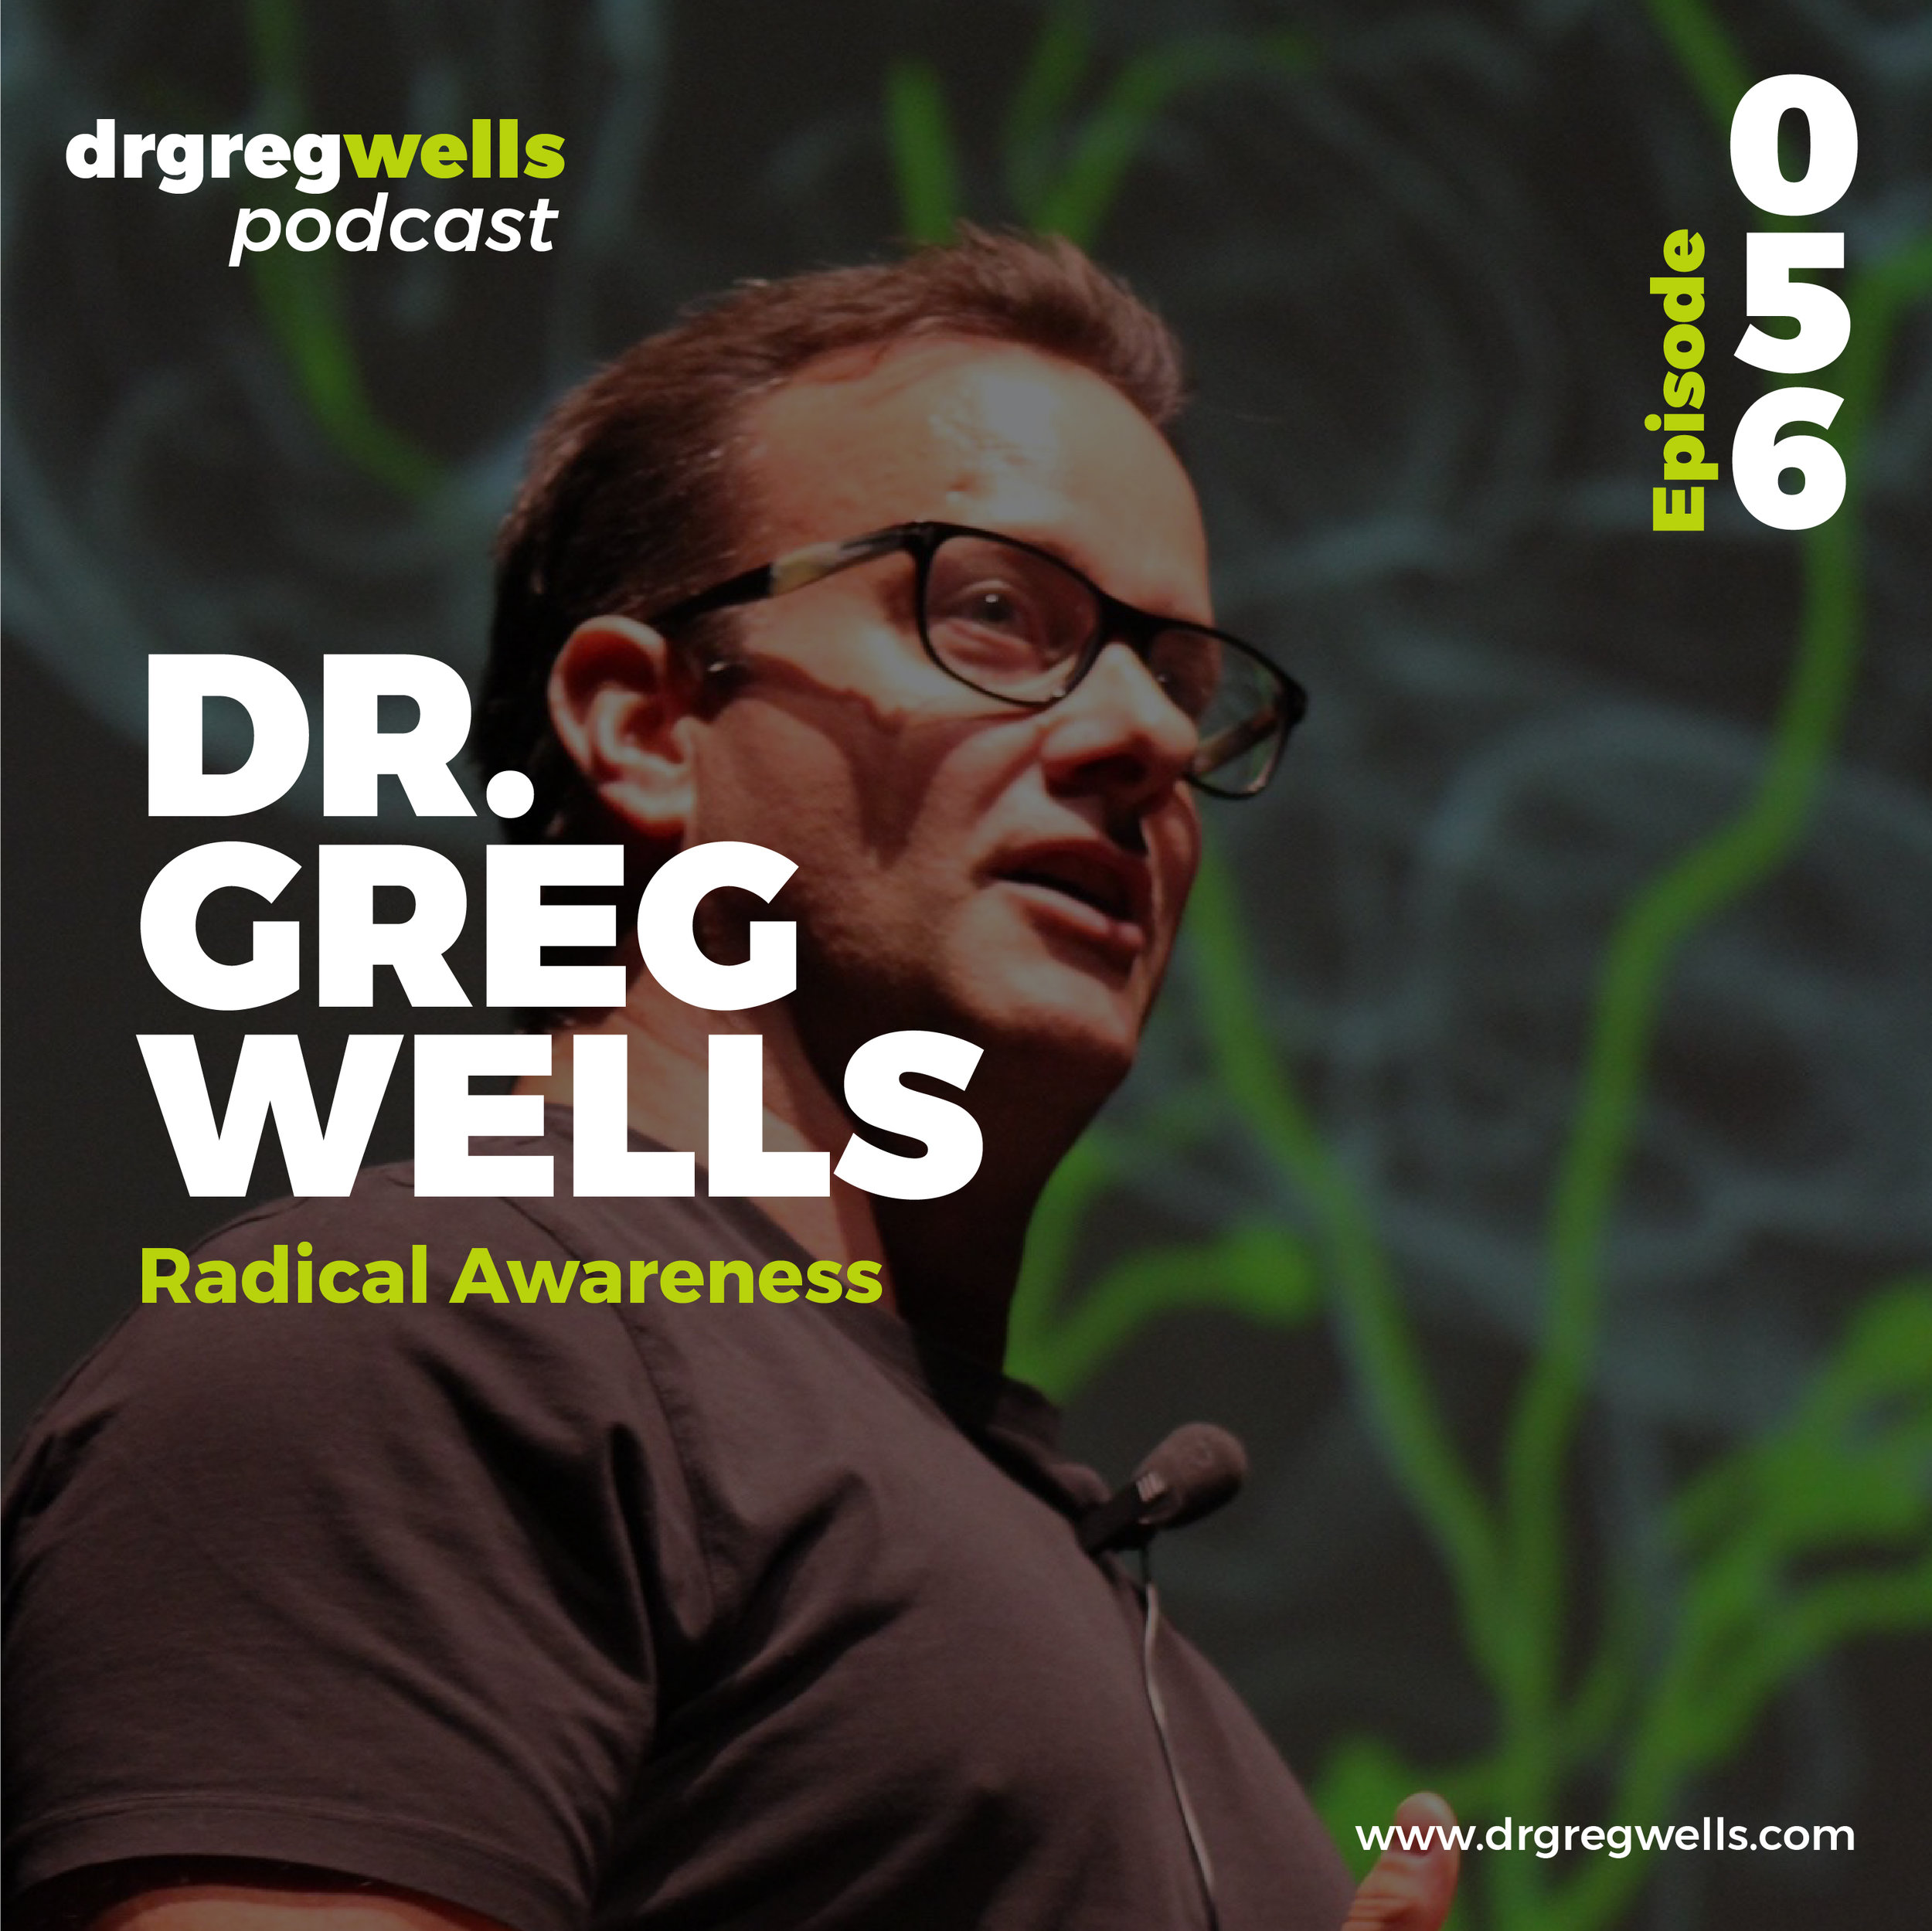 Dr Greg Wells Podcast Guest EP 55-57-02.jpg